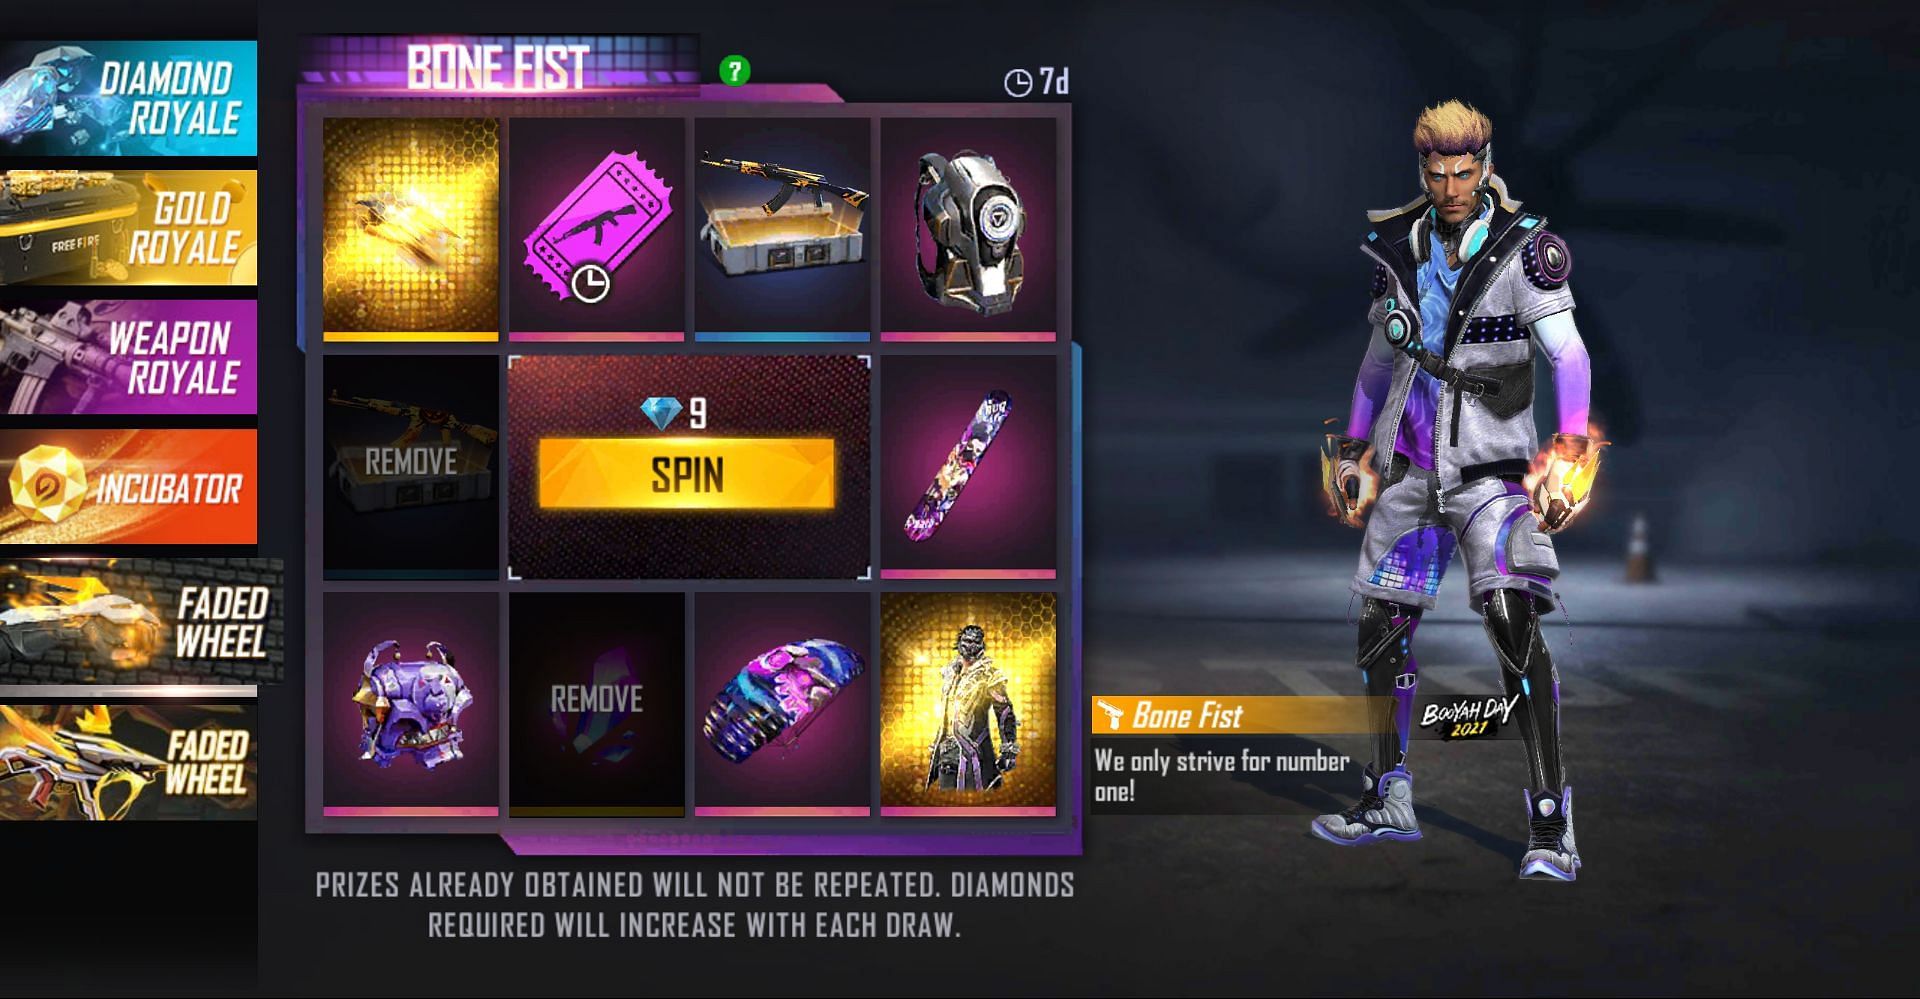 After removing the items, players can draw the rewards (Image via Free Fire)